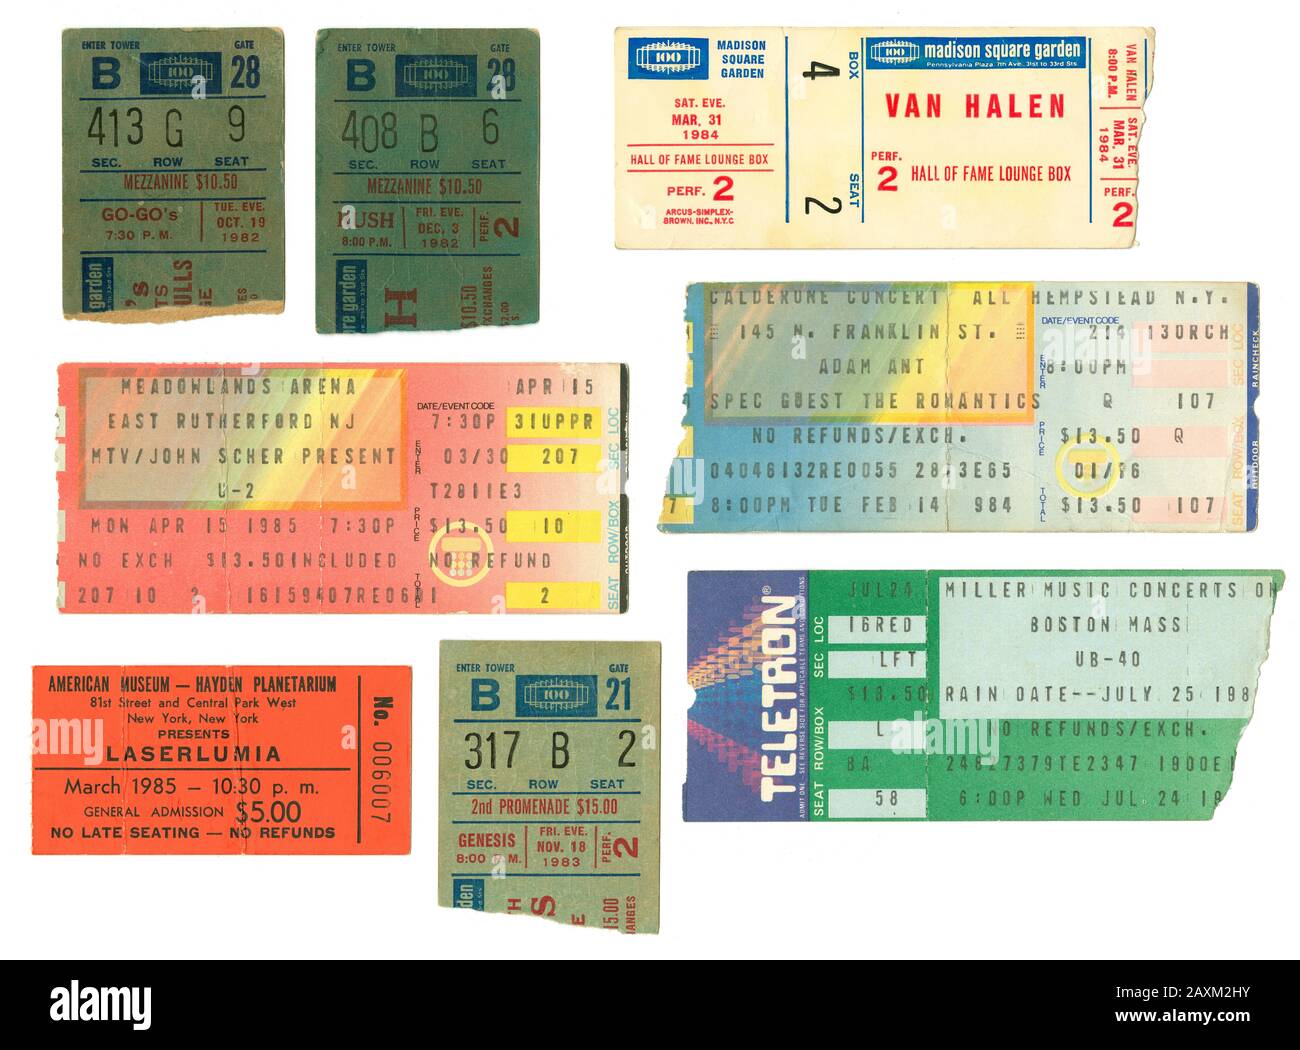 Group of early to mid 1980s rock concert ticket stubs.  Go-Go’s 1982 Madison Square Garden;  Rush 1982 Madison Square Garden;  Van Halen 1984 Madison Square Garden;  U2 1985 Meadowlands Arena;  Adam Ant 1984 Calderone Concert Hall;  Laserlumia 1985 Hayden Planetarium;  Genesis 1983 Madison Square Garden;  UB40 1985 Miller Music Concerts on the Common Stock Photo